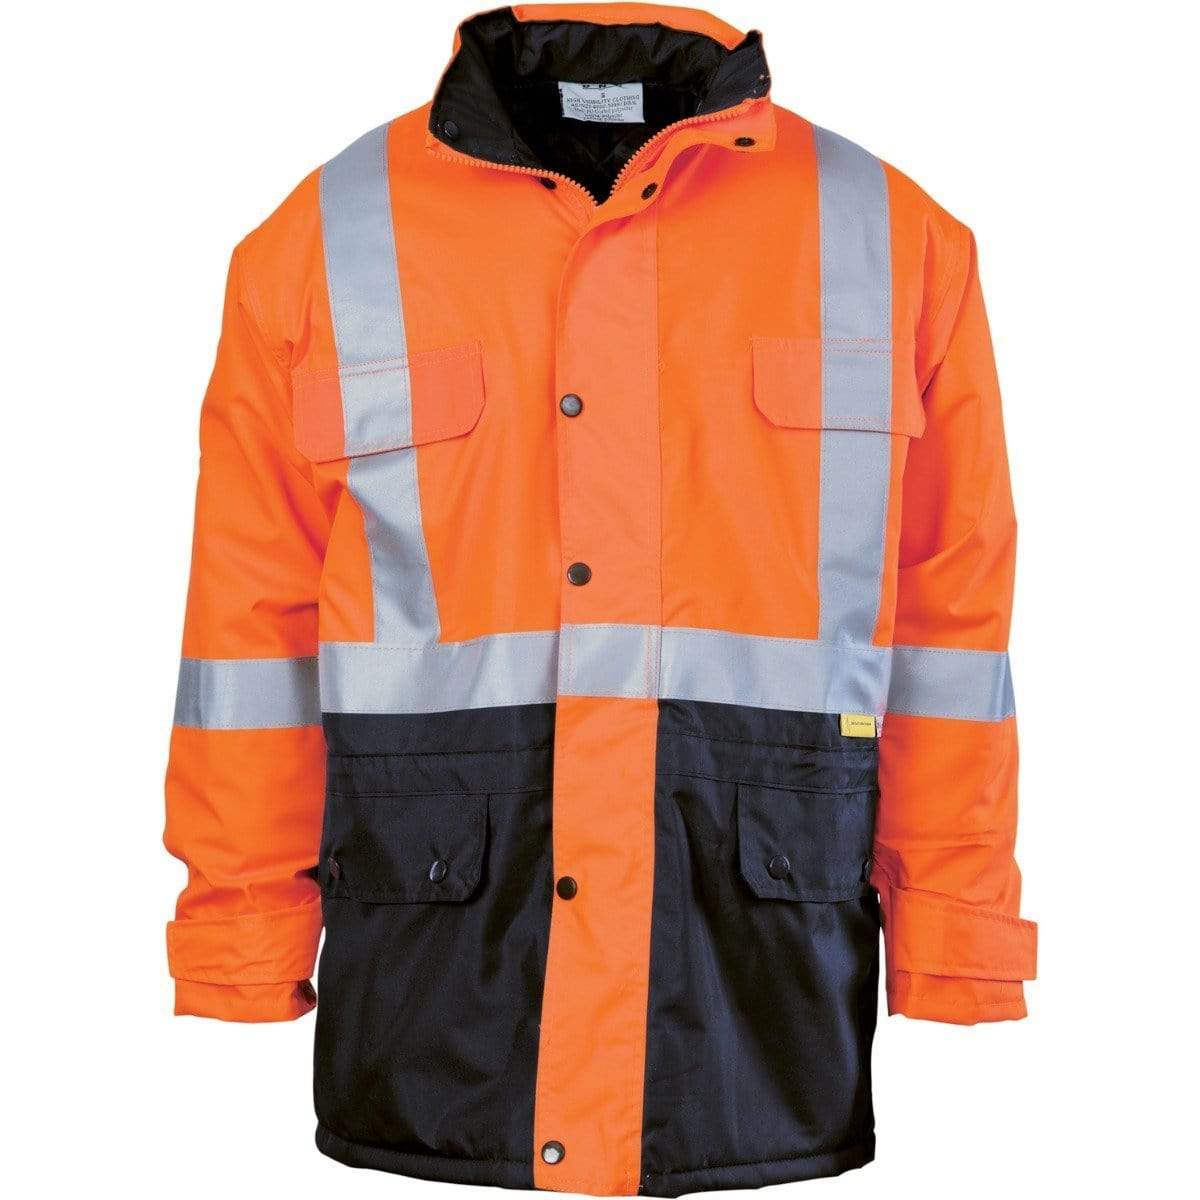 DNC Workwear Work Wear Orange/Navy / S DNC WORKWEAR Hi-Vis Two-Tone Quilted Jacket with 3M Reflective Tape 3863